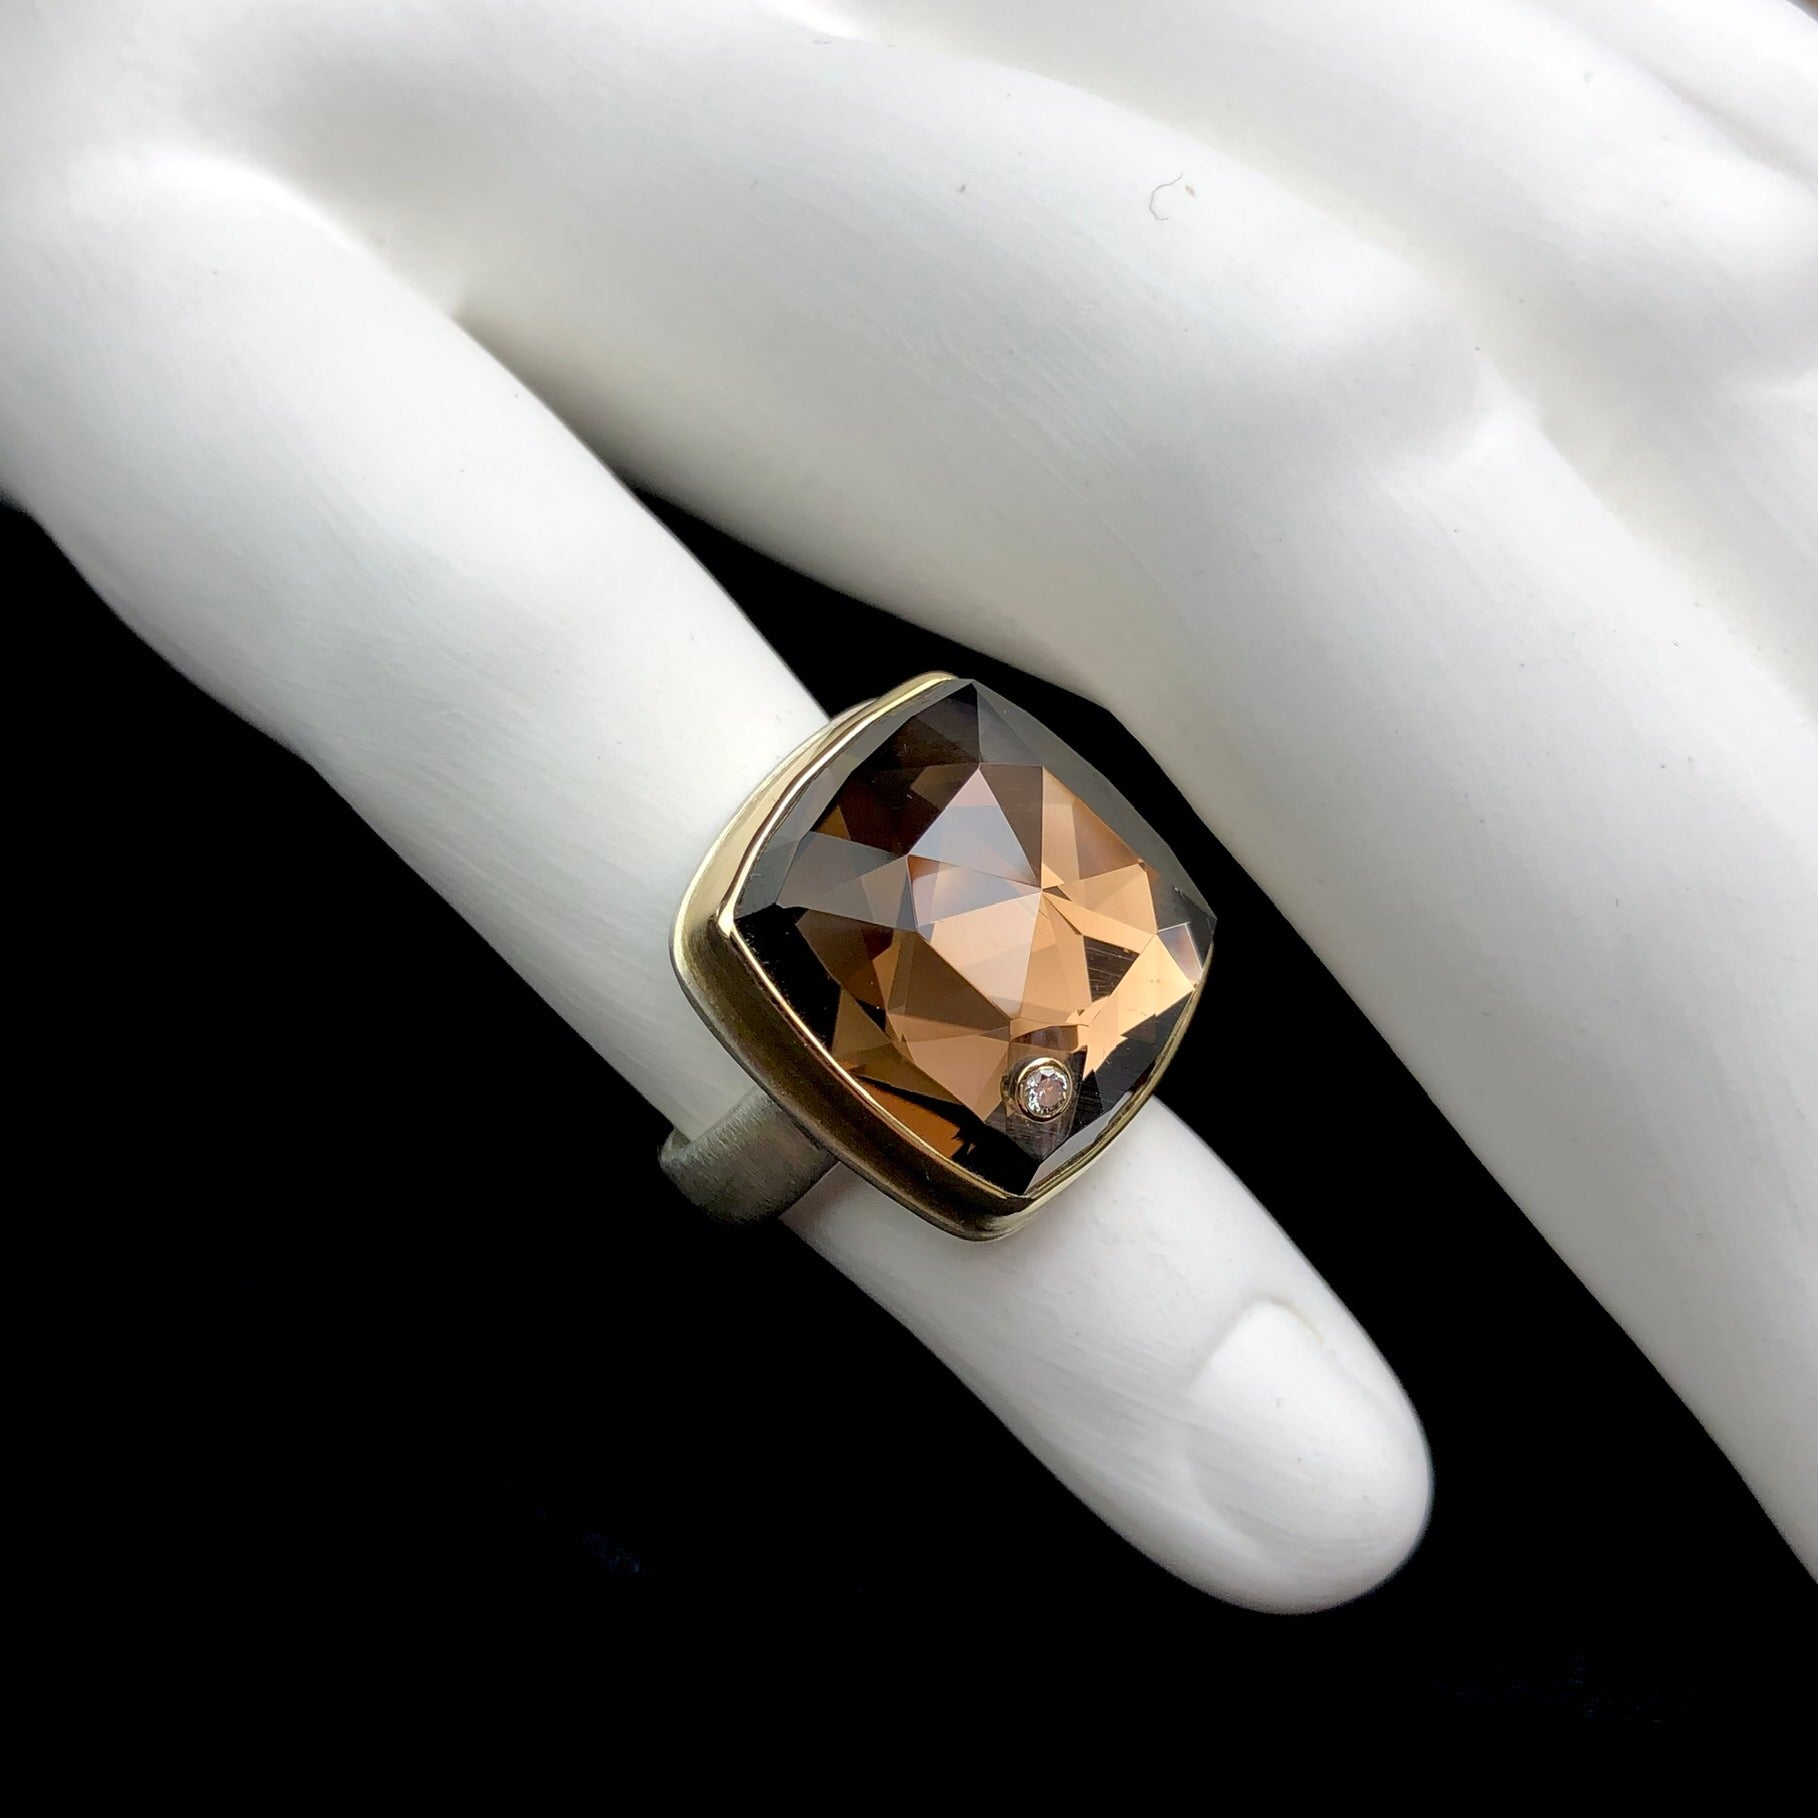 Front side view of diamond accent and signature band of smokey quartz ring shown on white sculpted ceramic finger